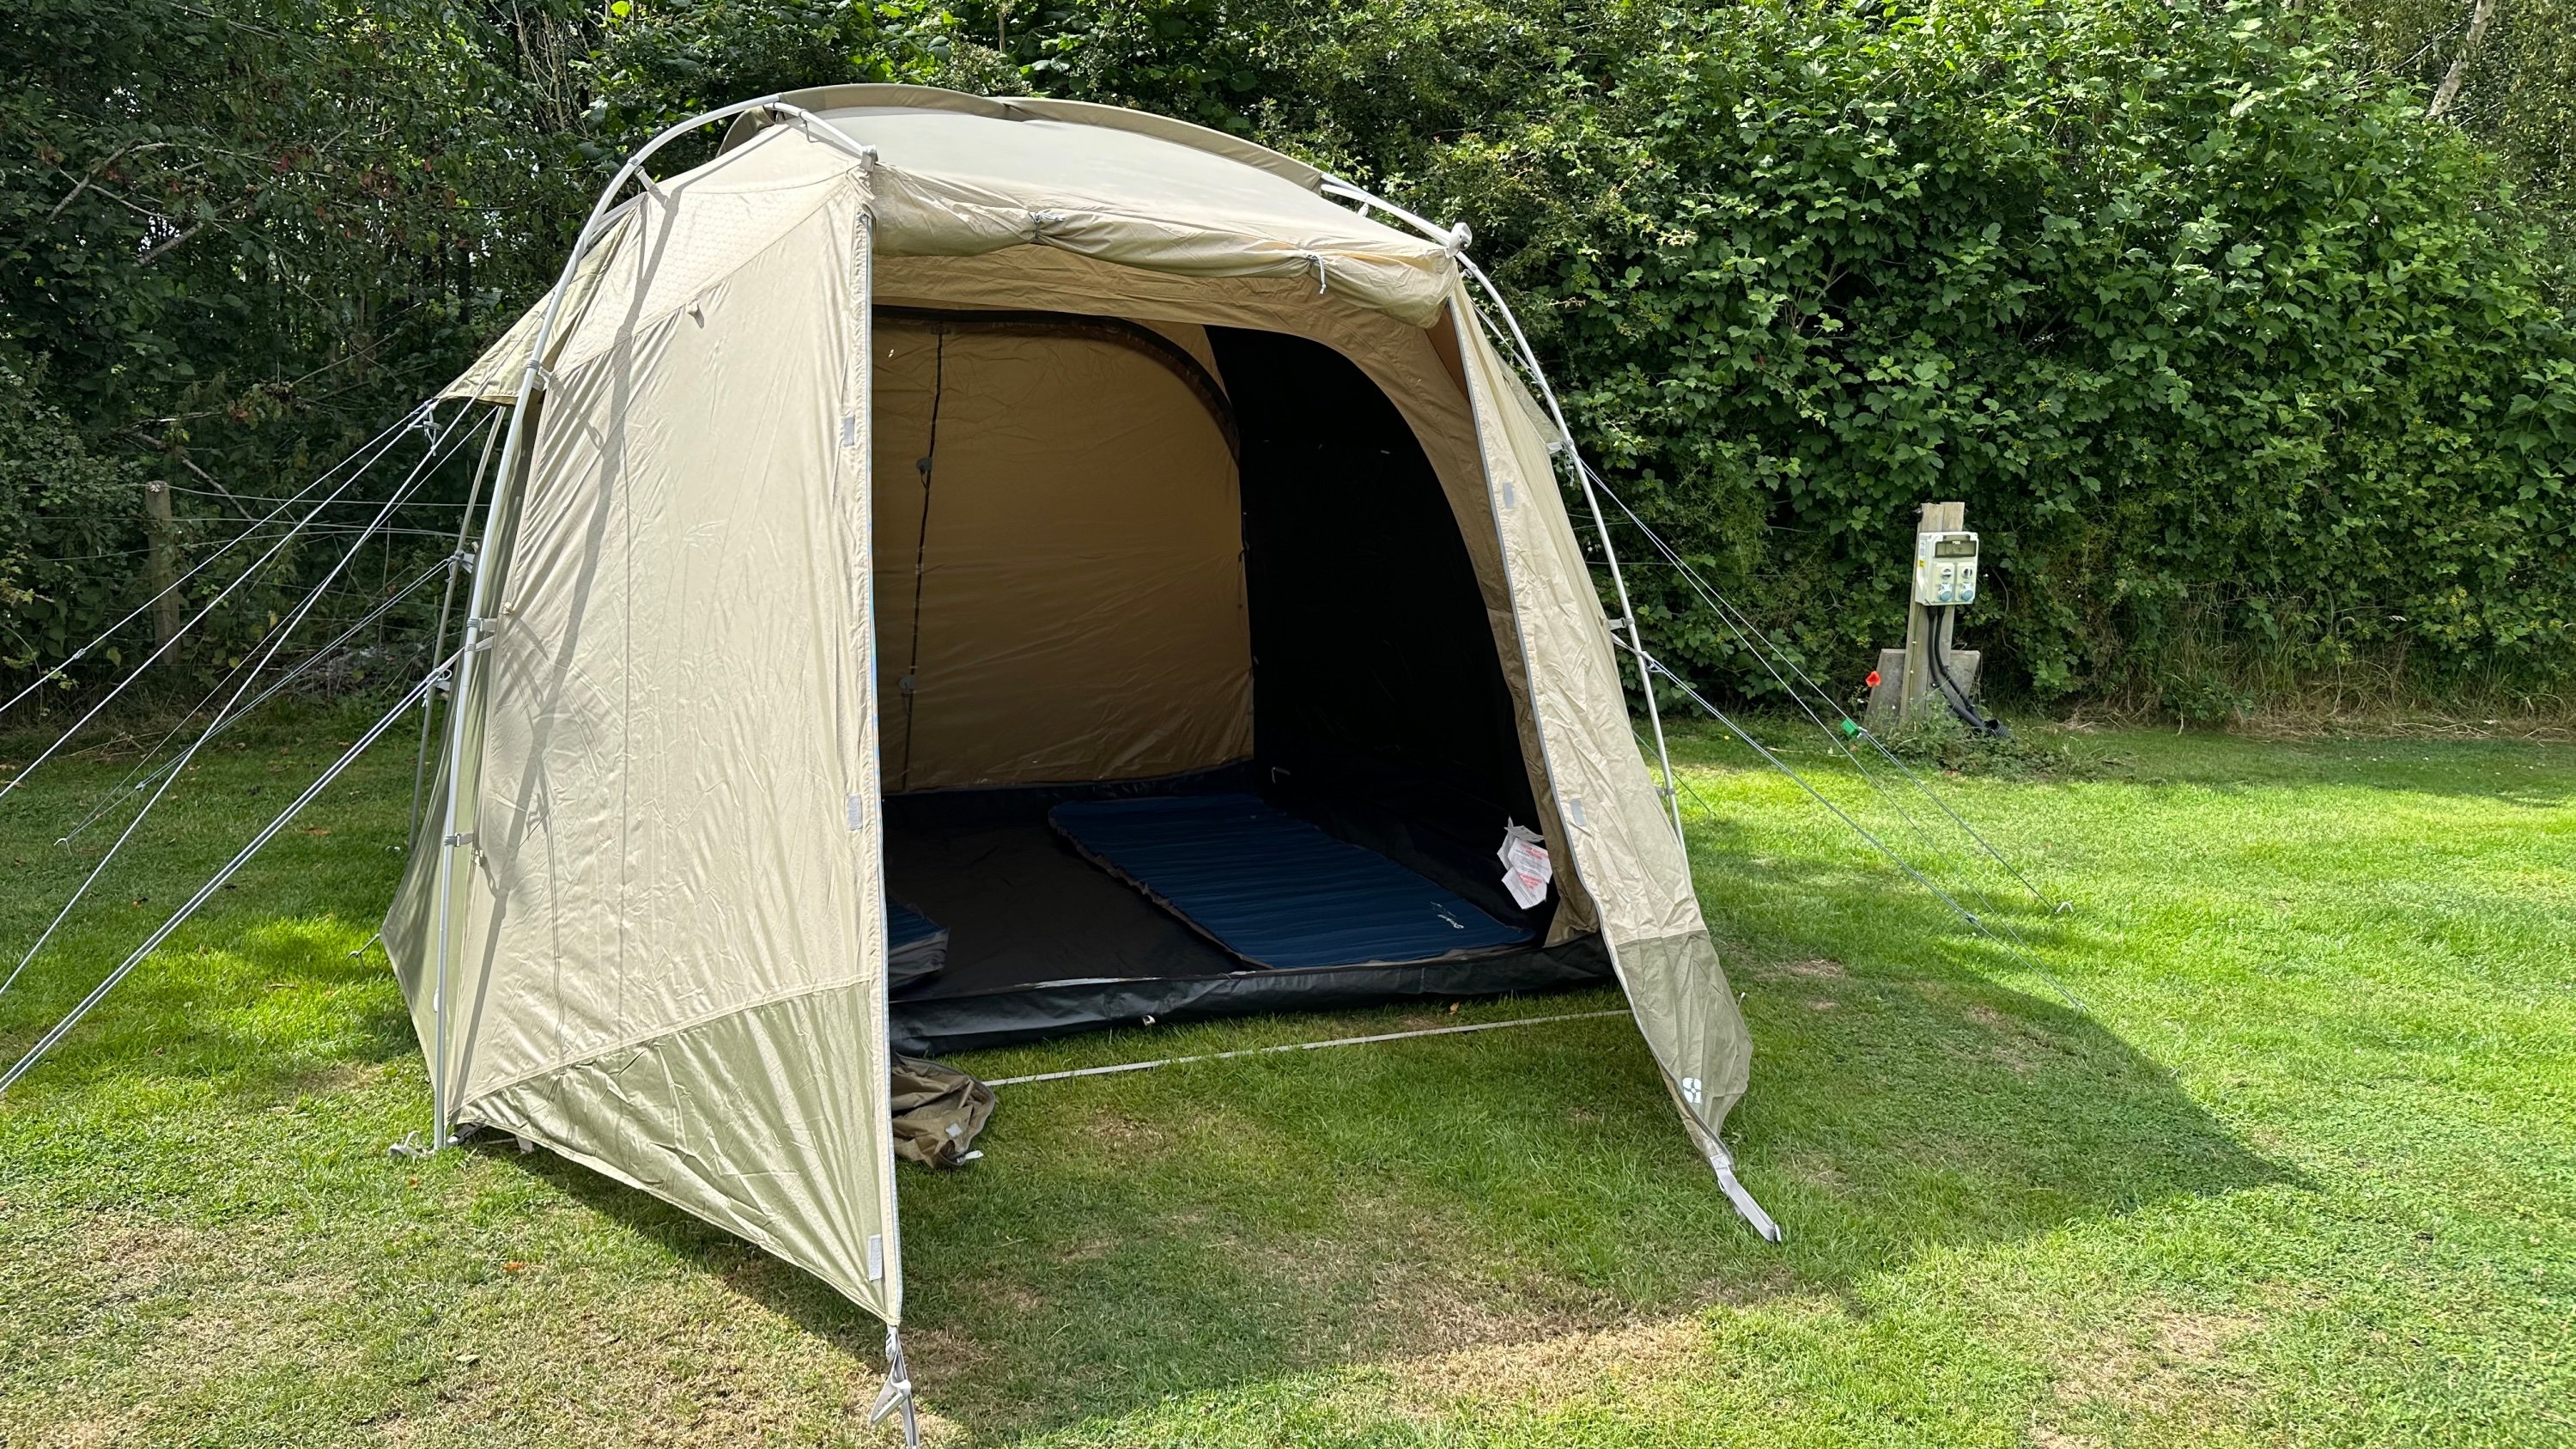 Tent pitched with inner and the doors open